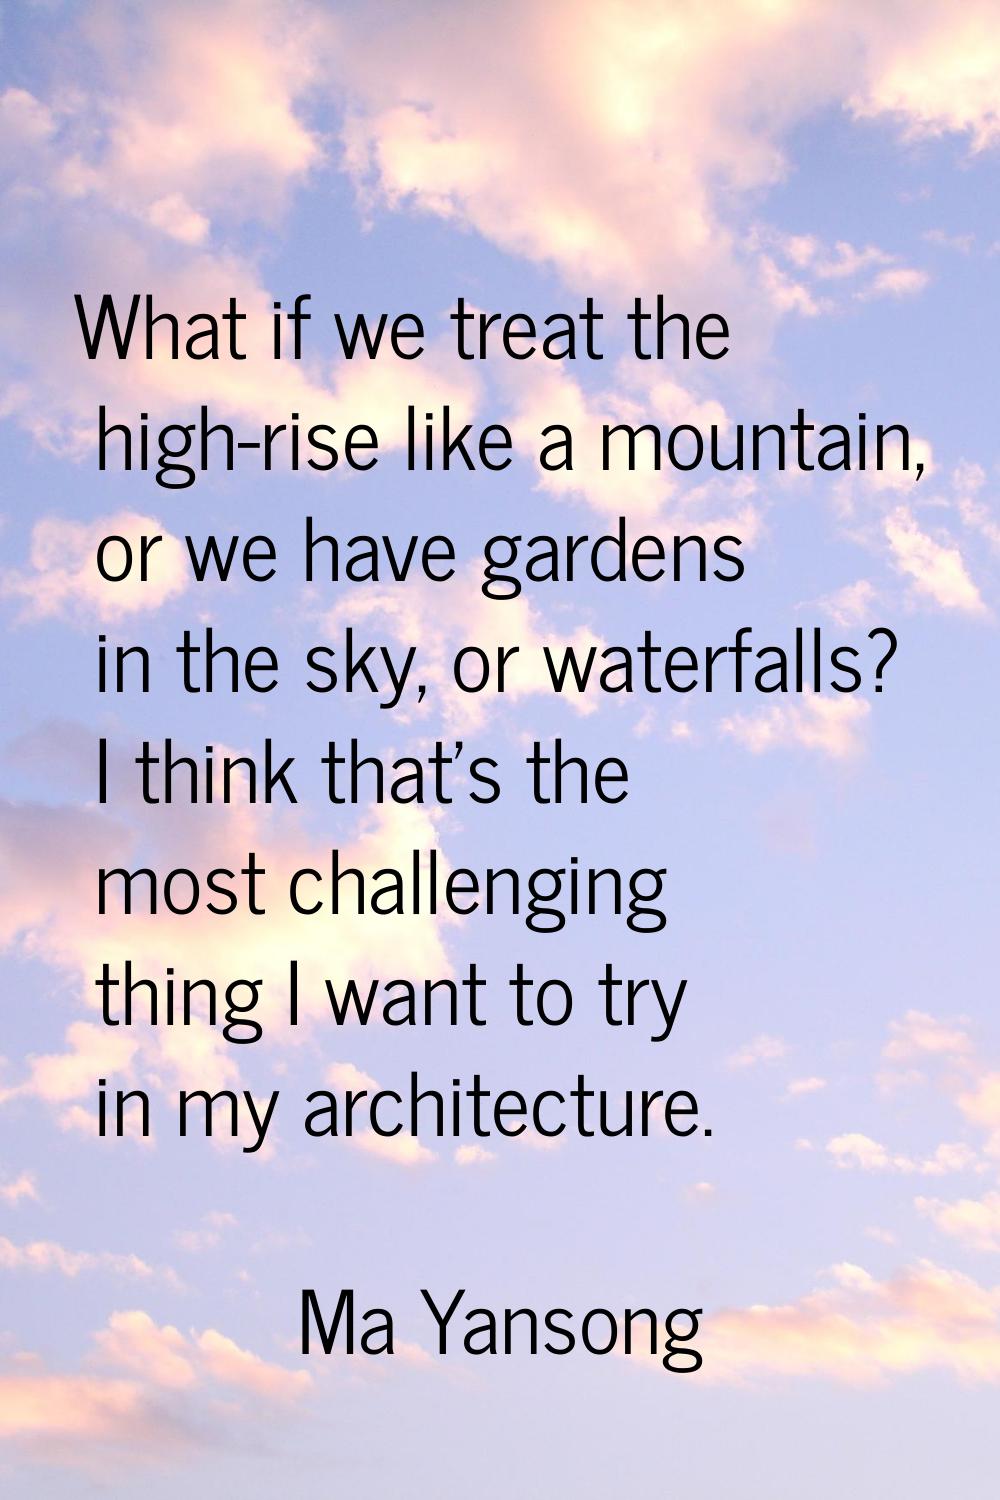 What if we treat the high-rise like a mountain, or we have gardens in the sky, or waterfalls? I thi